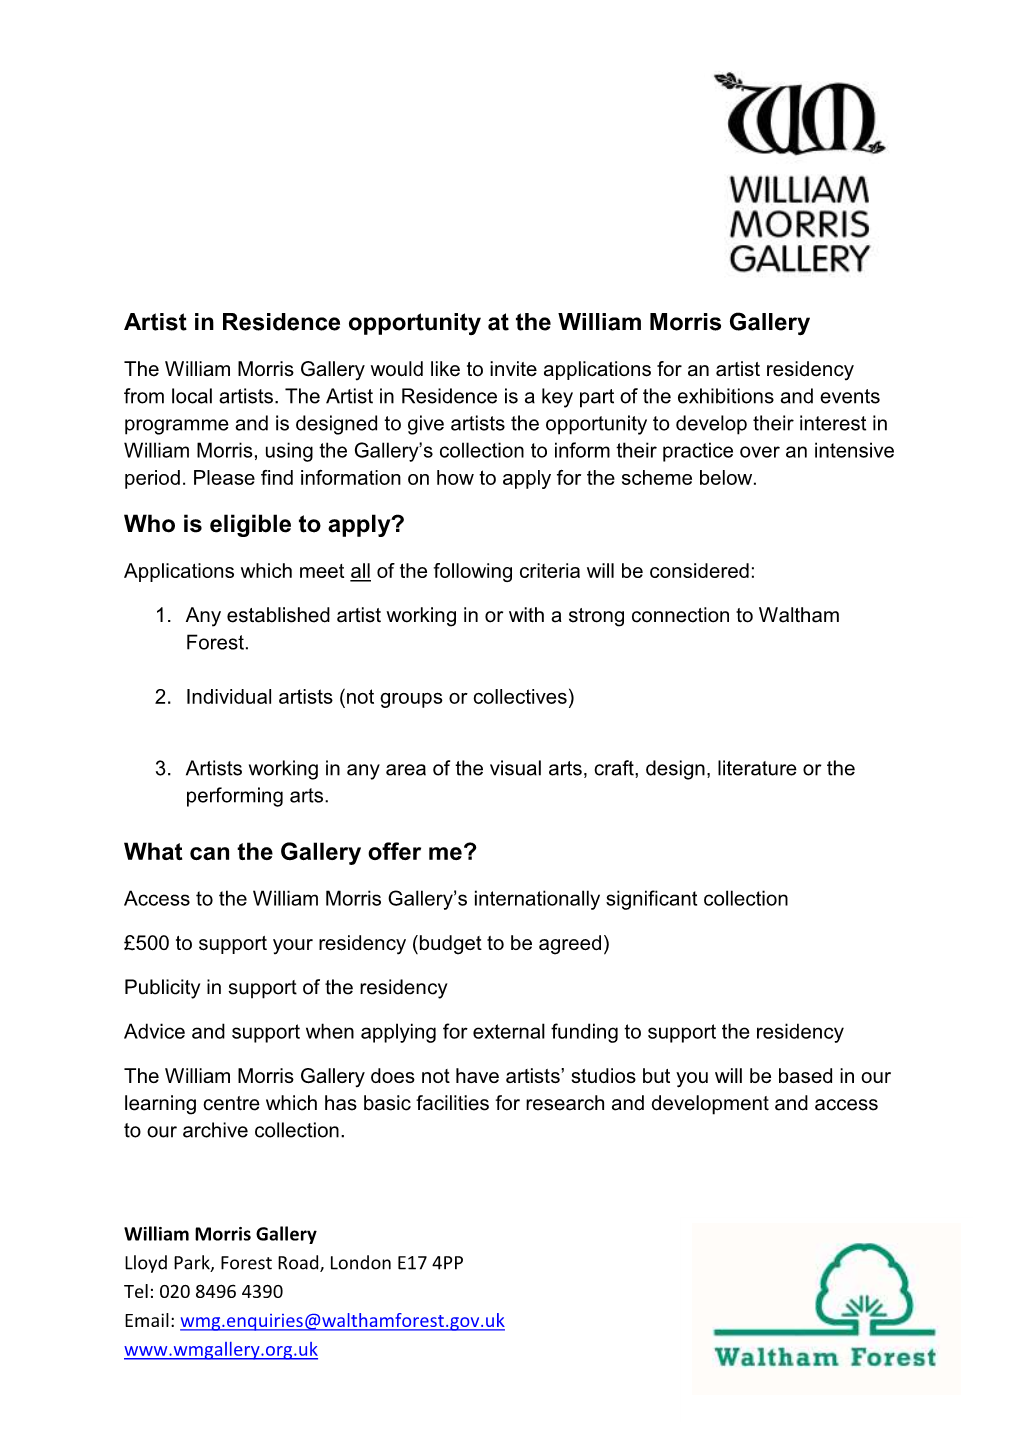 Artist in Residence Opportunity at the William Morris Gallery Who Is